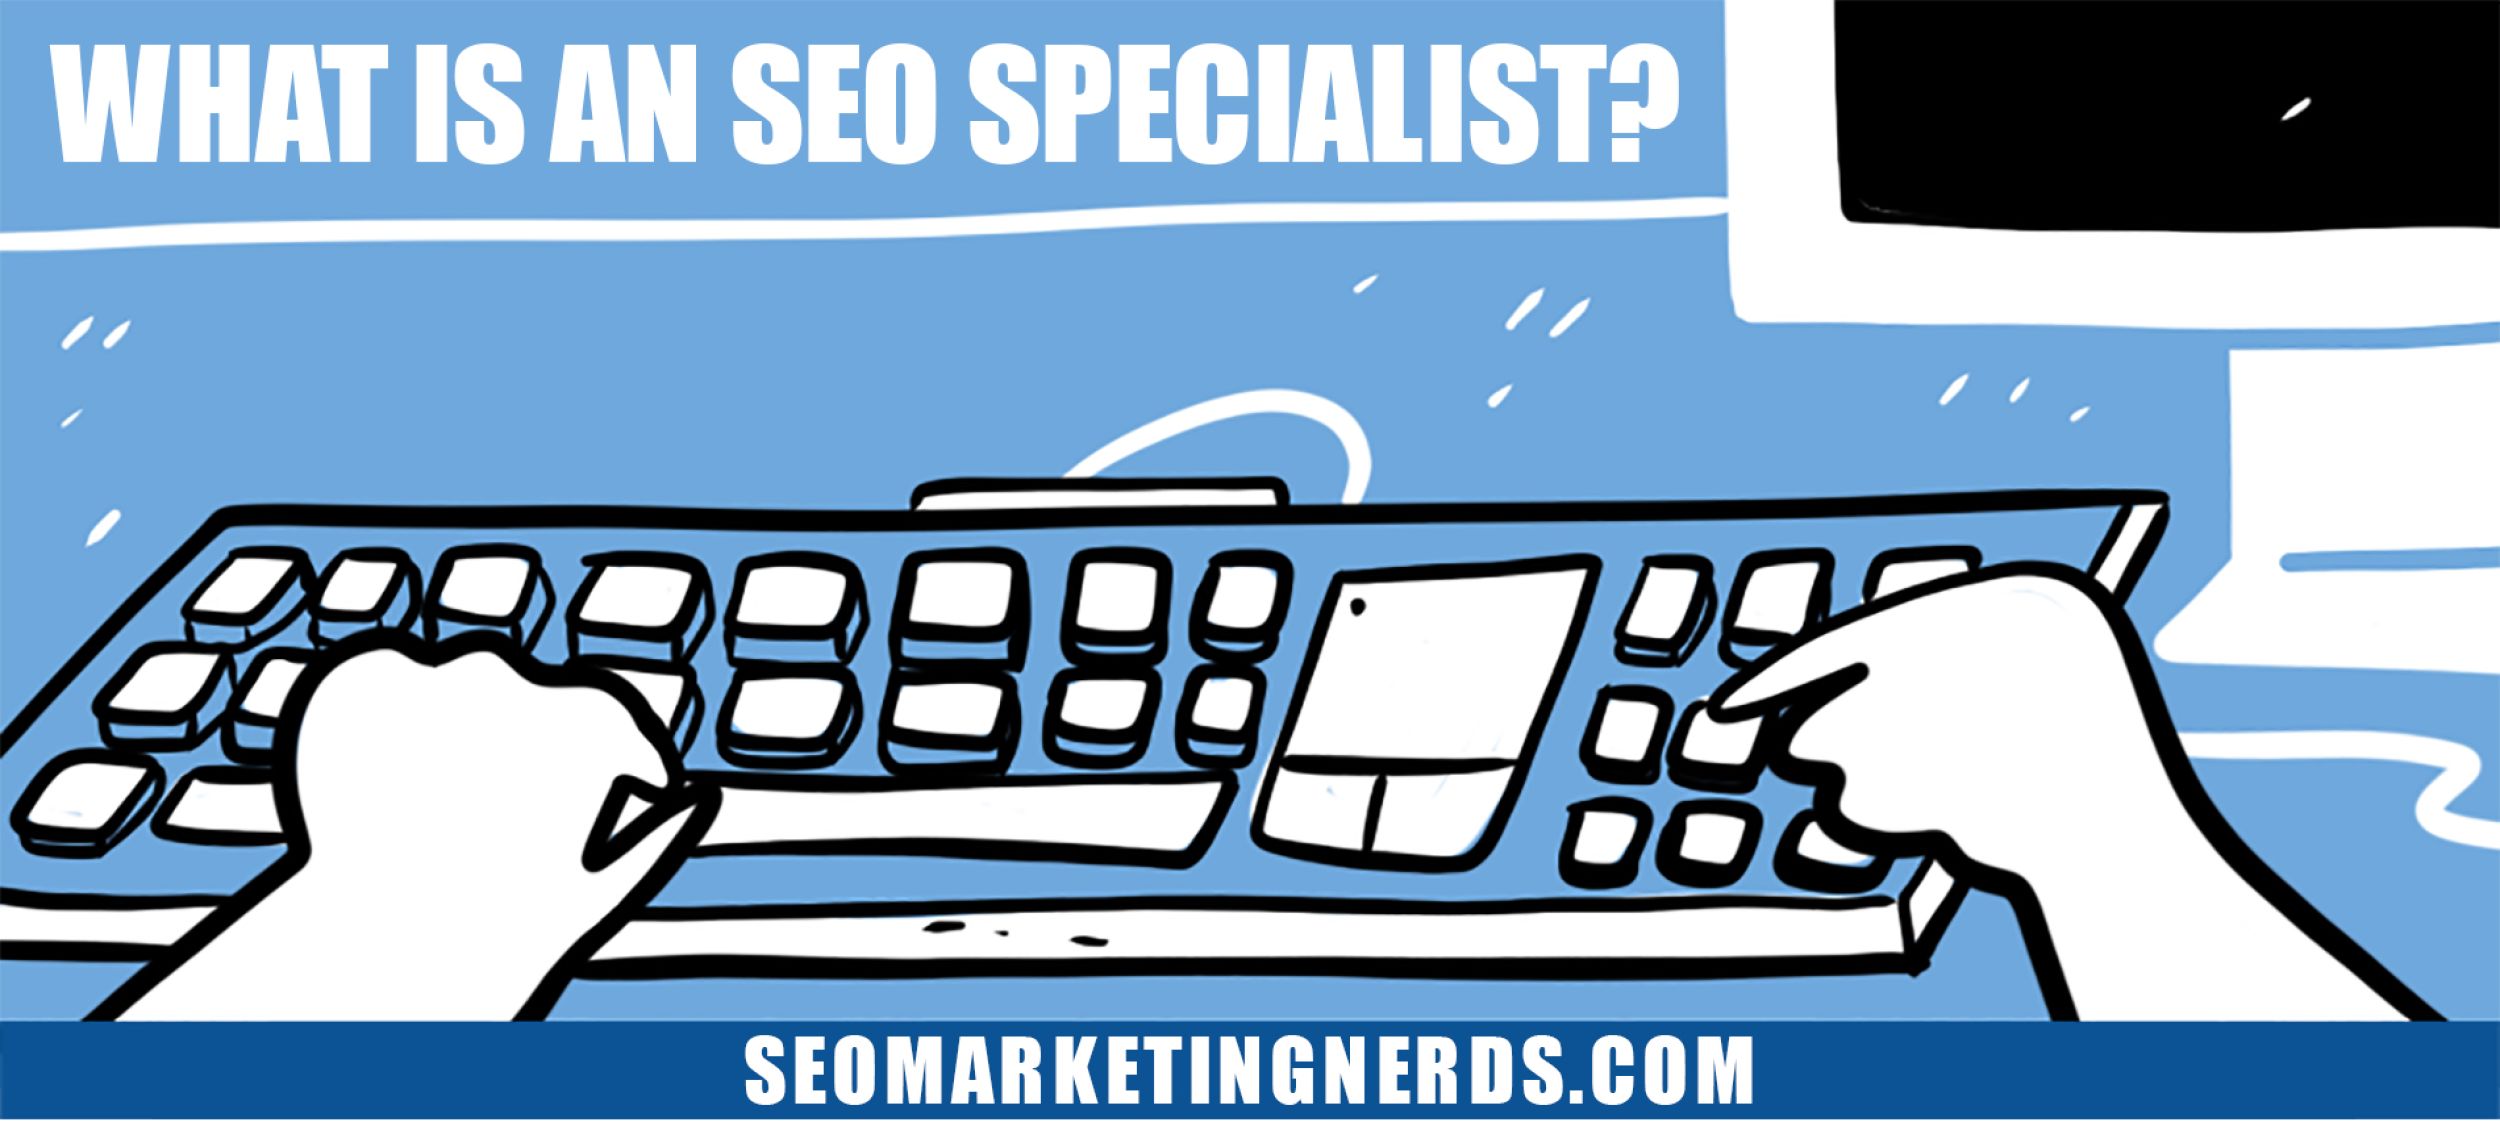 What is an SEO specialist?